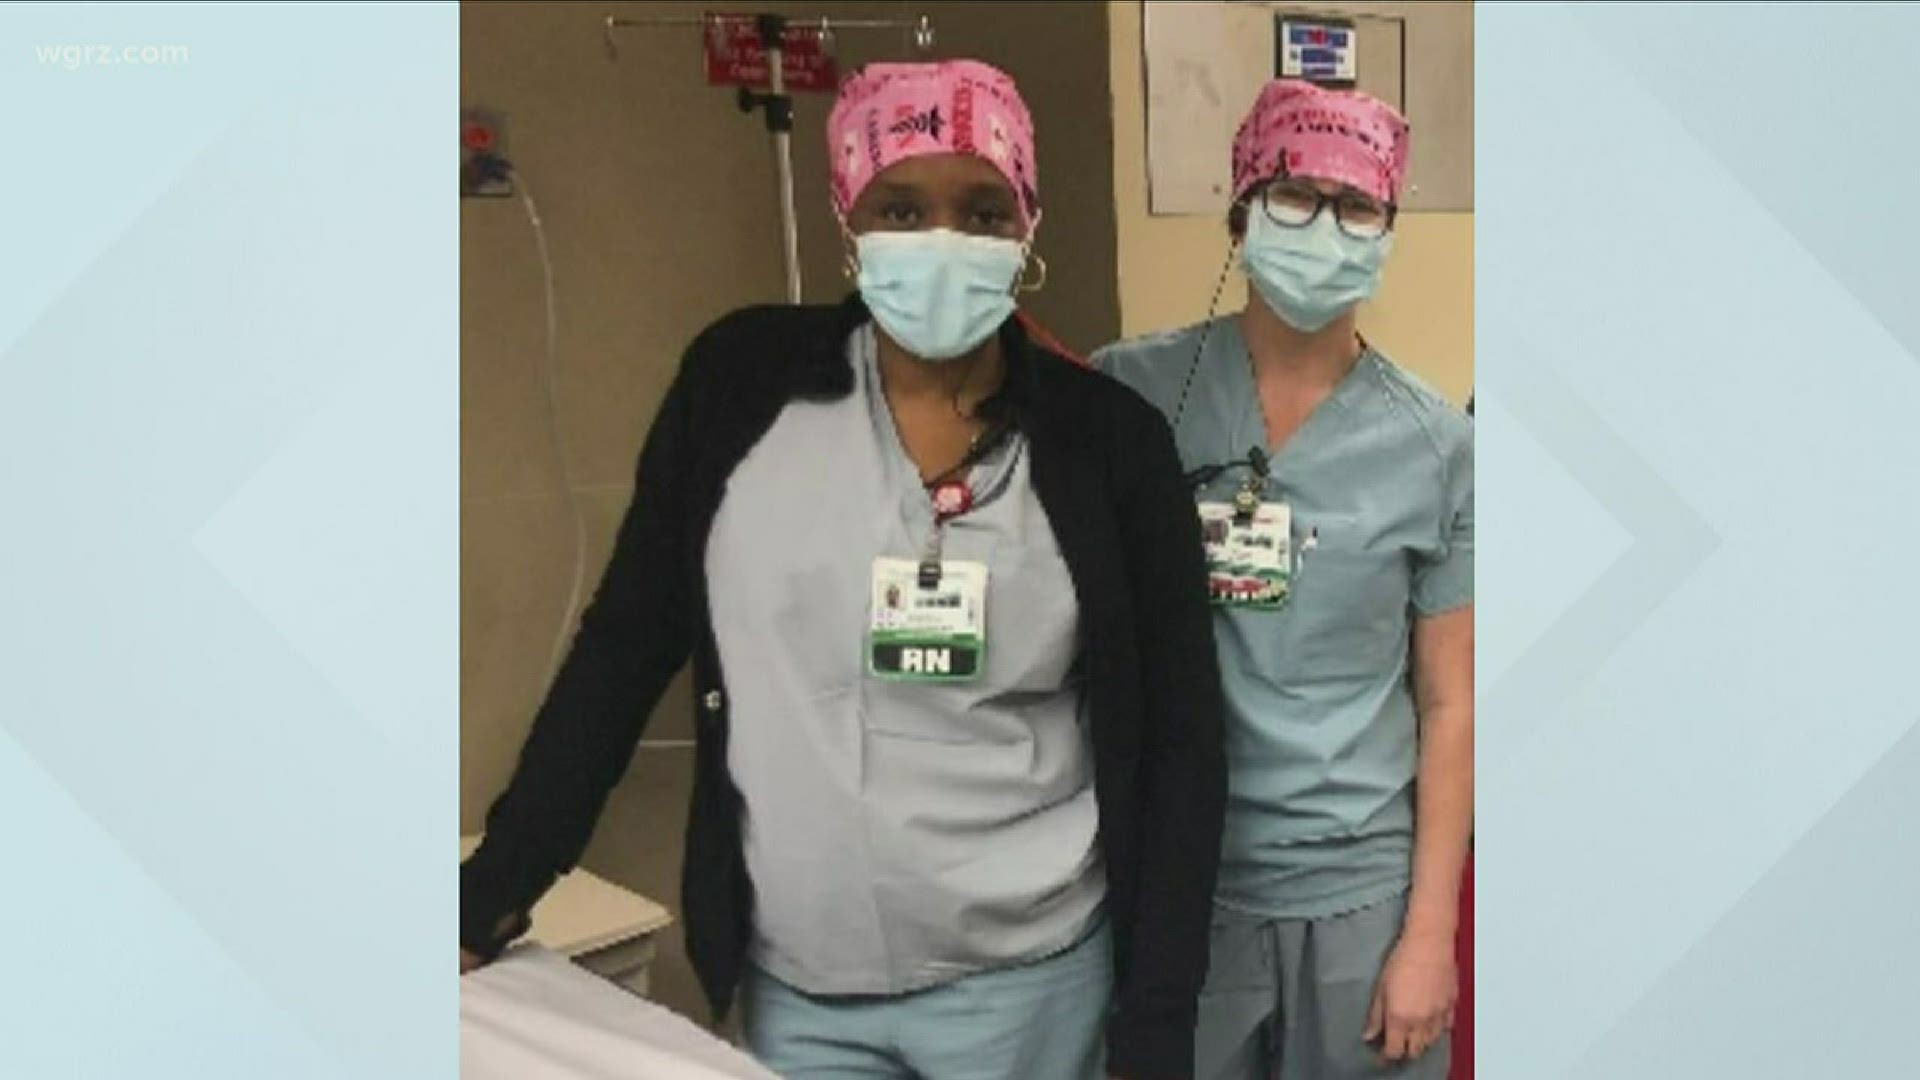 Shentelle Bell has served as a nurse at ECMC for 18 years